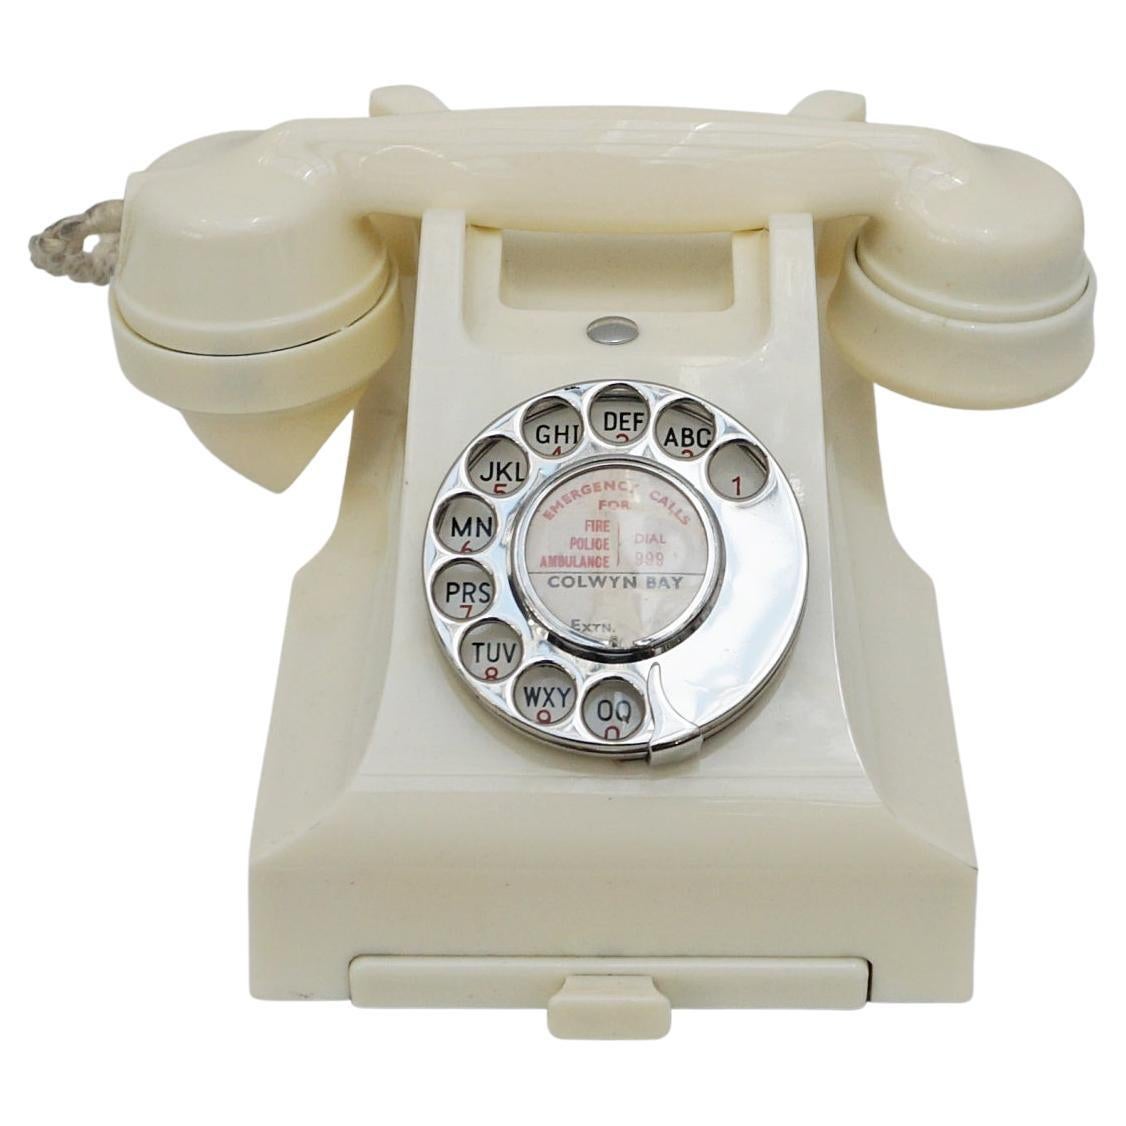 Ivory Handset Plaited 3-Way Suitable for Bakelite Phone ☎️ ☎️ Telephone Cord 